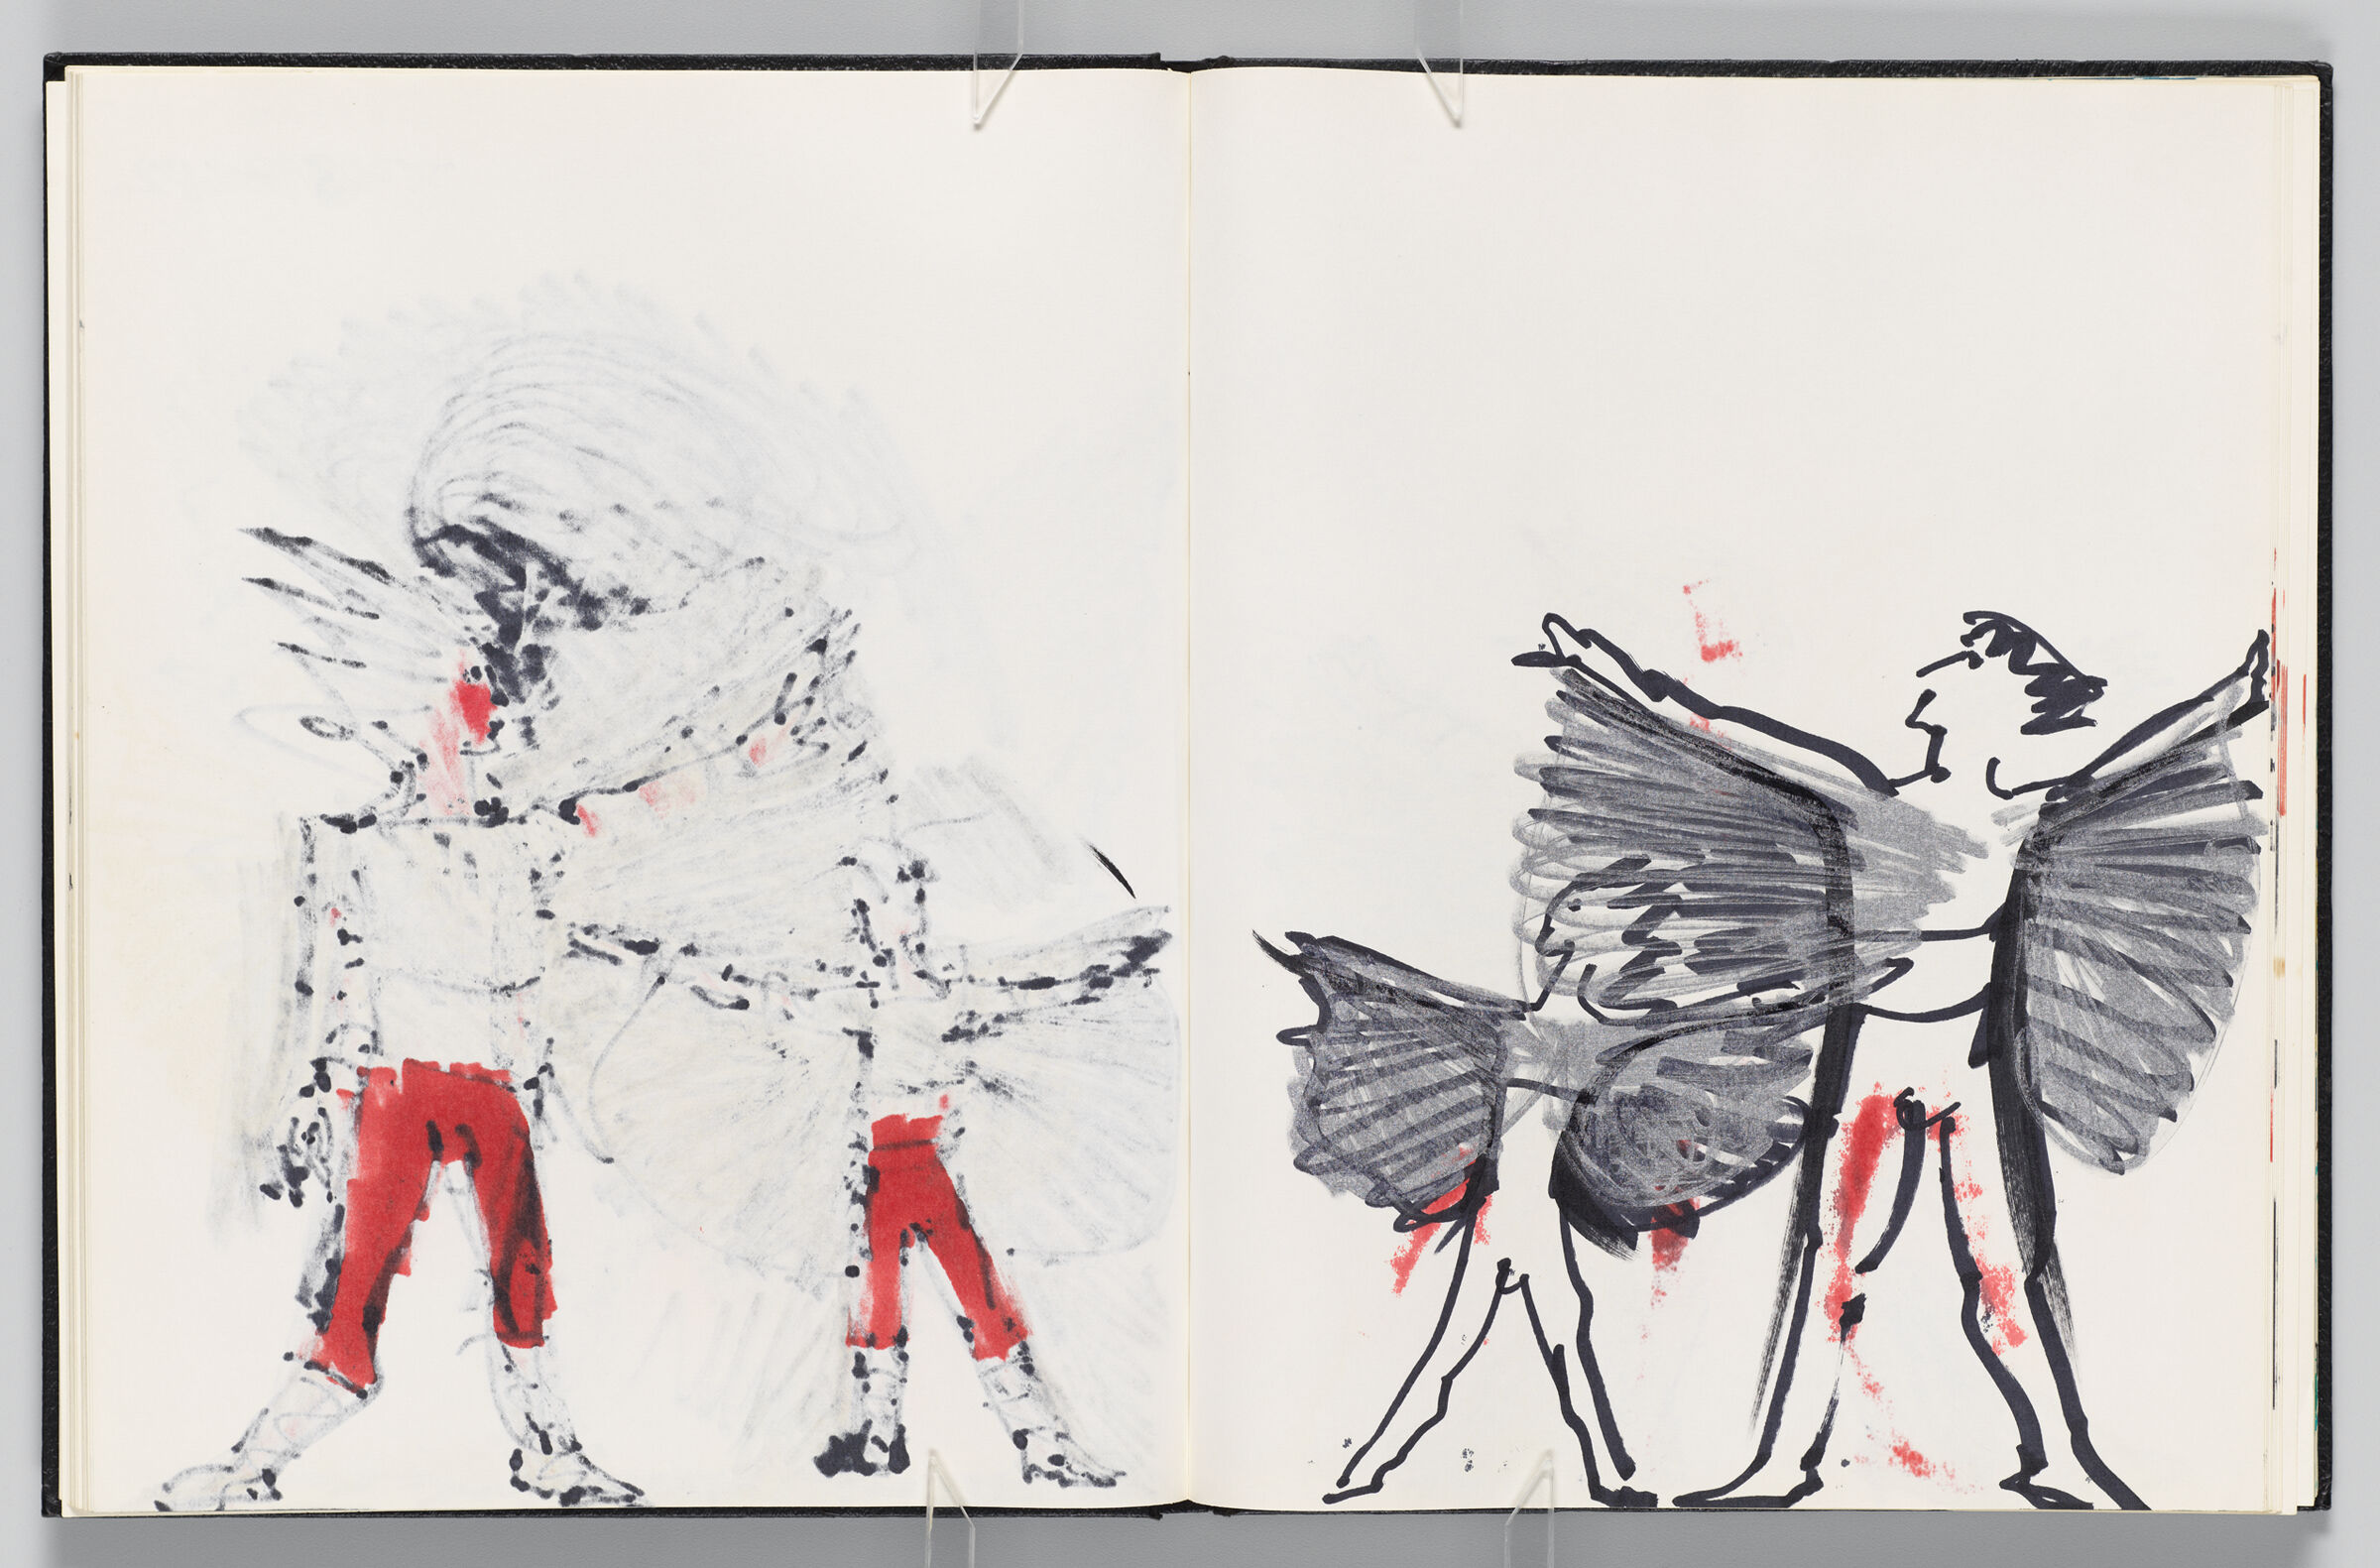 Untitled (Bleed-Through Of Previous Page, Left Page); Untitled (Icarus Costumes, Right Page)